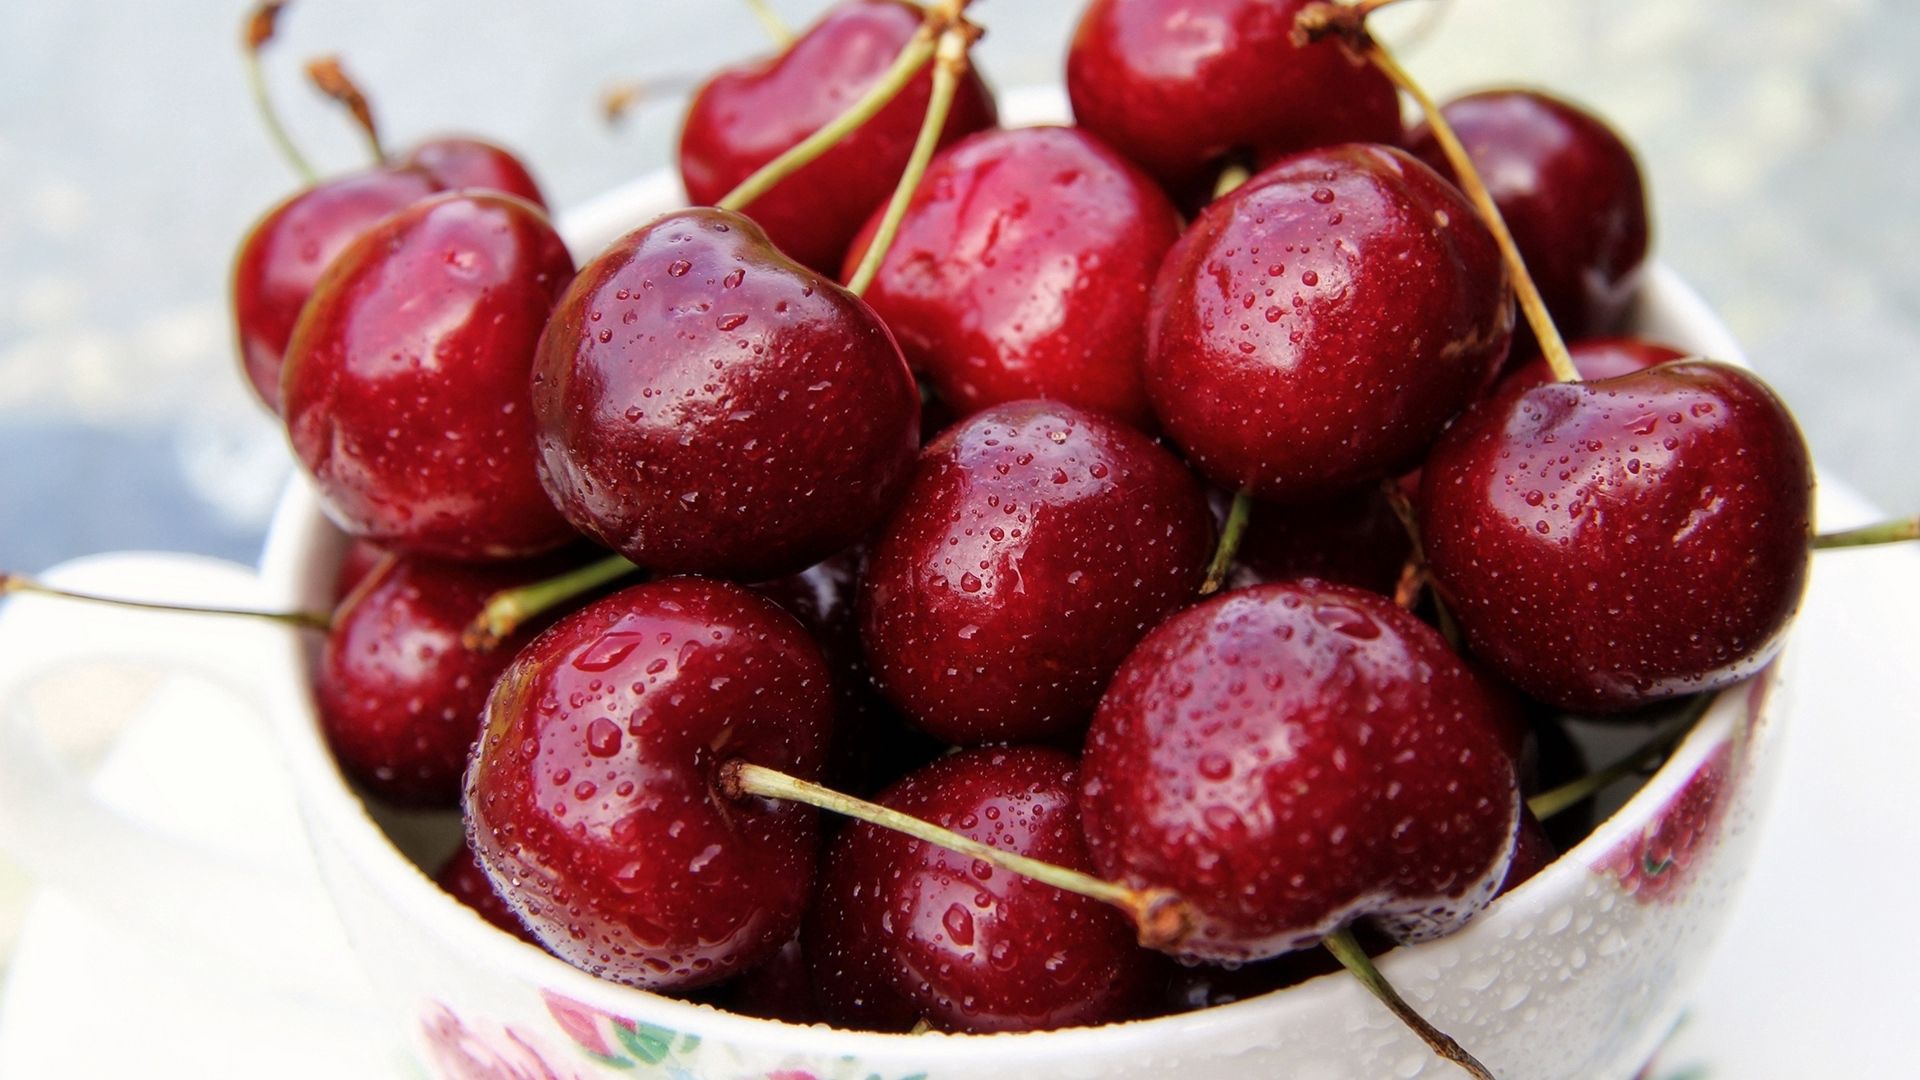 97134 download wallpaper sweet cherry, food, berries, plate, ripe screensavers and pictures for free